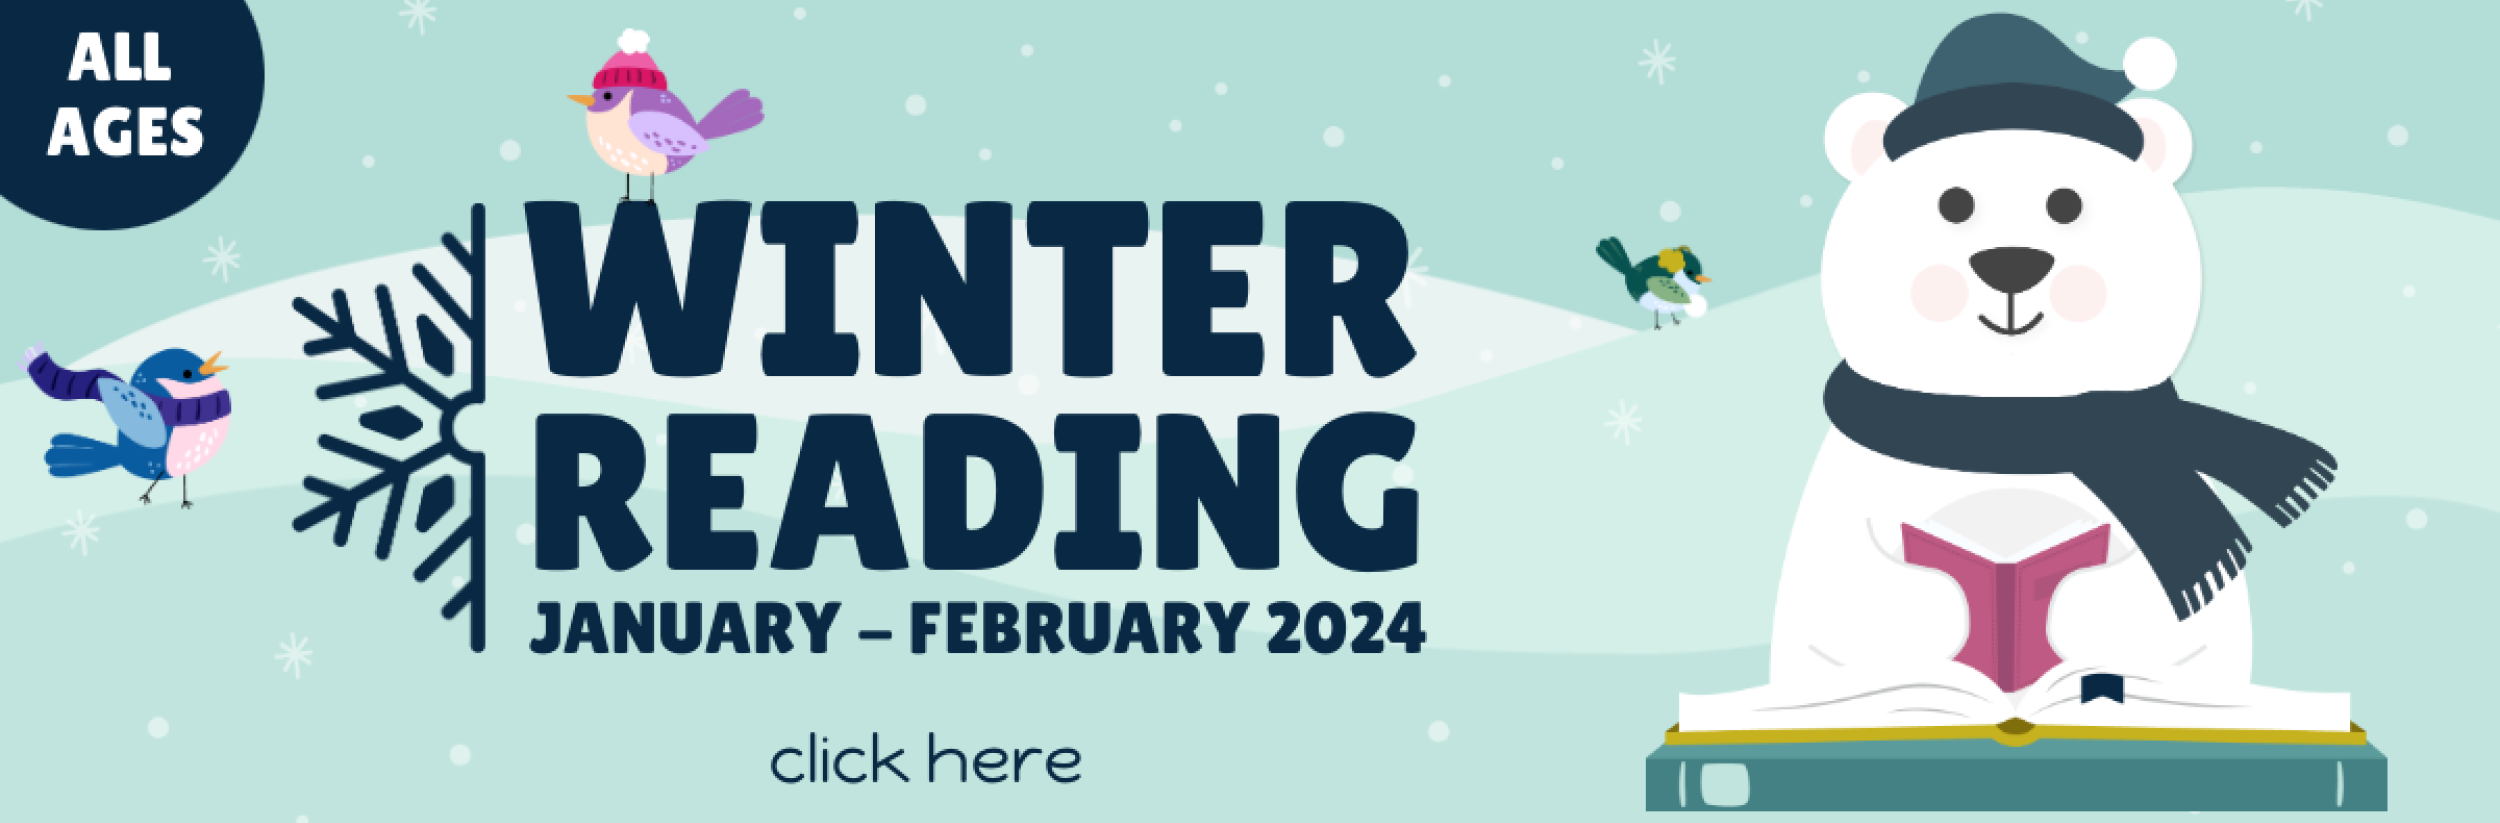 Image for "2024 Winter Reading Clubs"